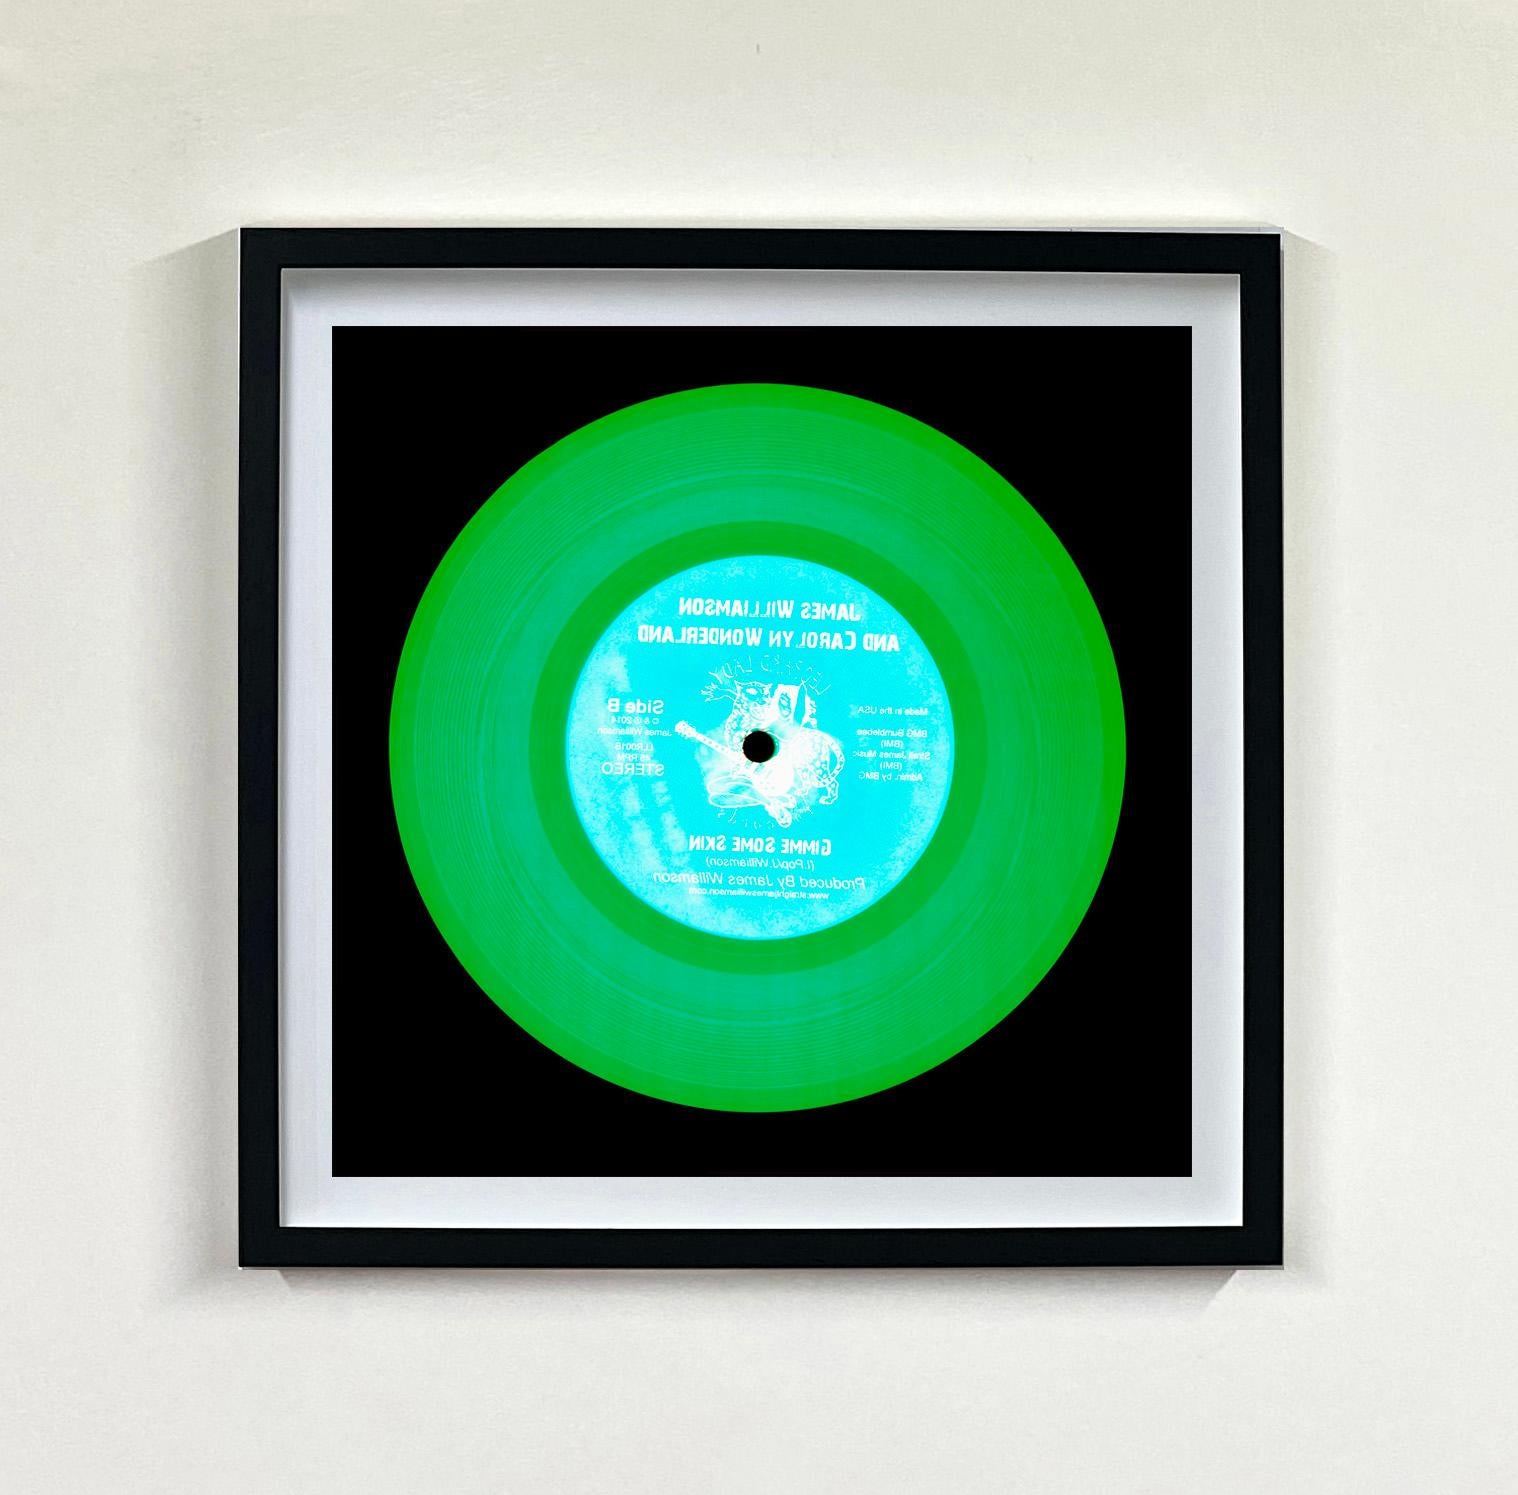 Heidler & Heeps Vinyl Collection Nine Piece Multicolor Installation.
Acclaimed contemporary photographers, Richard Heeps and Natasha Heidler have collaborated to make this beautifully mesmerising collection. A celebration of the vinyl record and